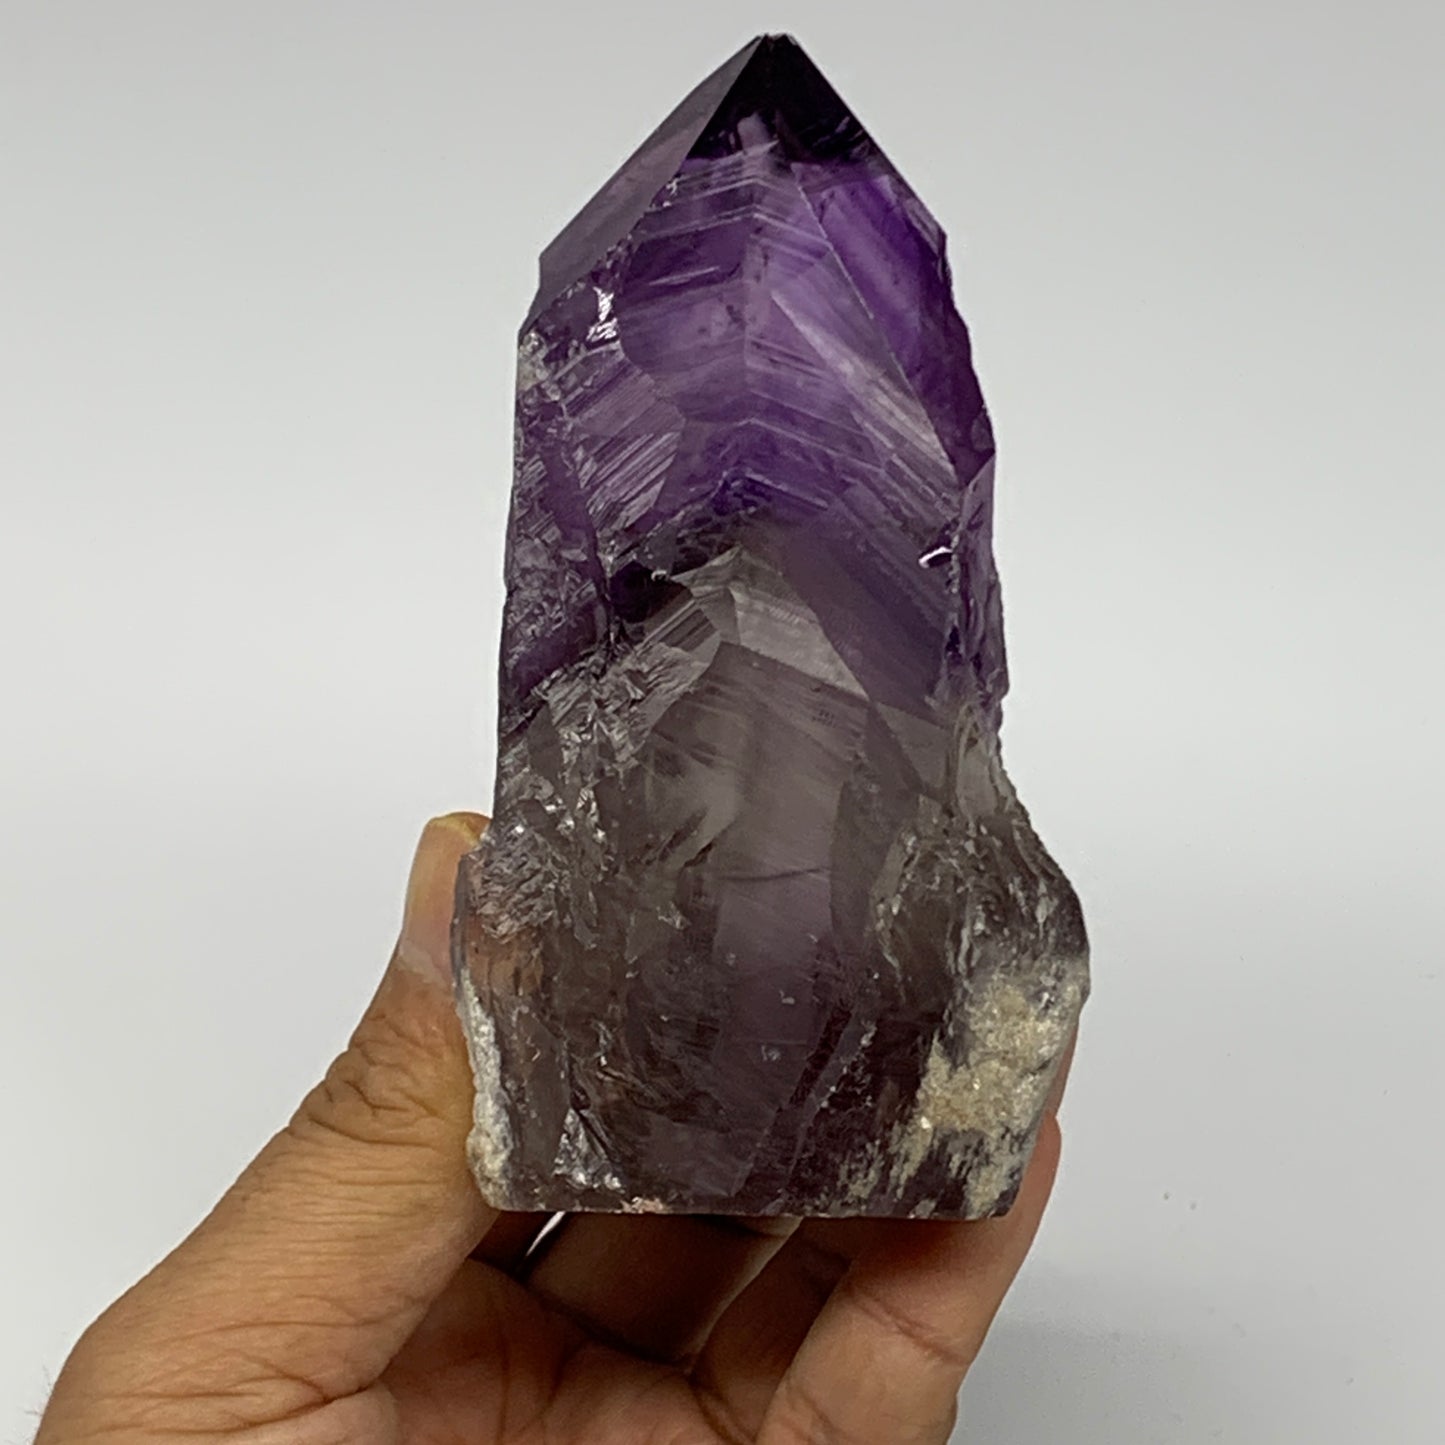 263.1g,4"x2.1"x1.5", Amethyst Point Polished Rough lower part Stands, B19056